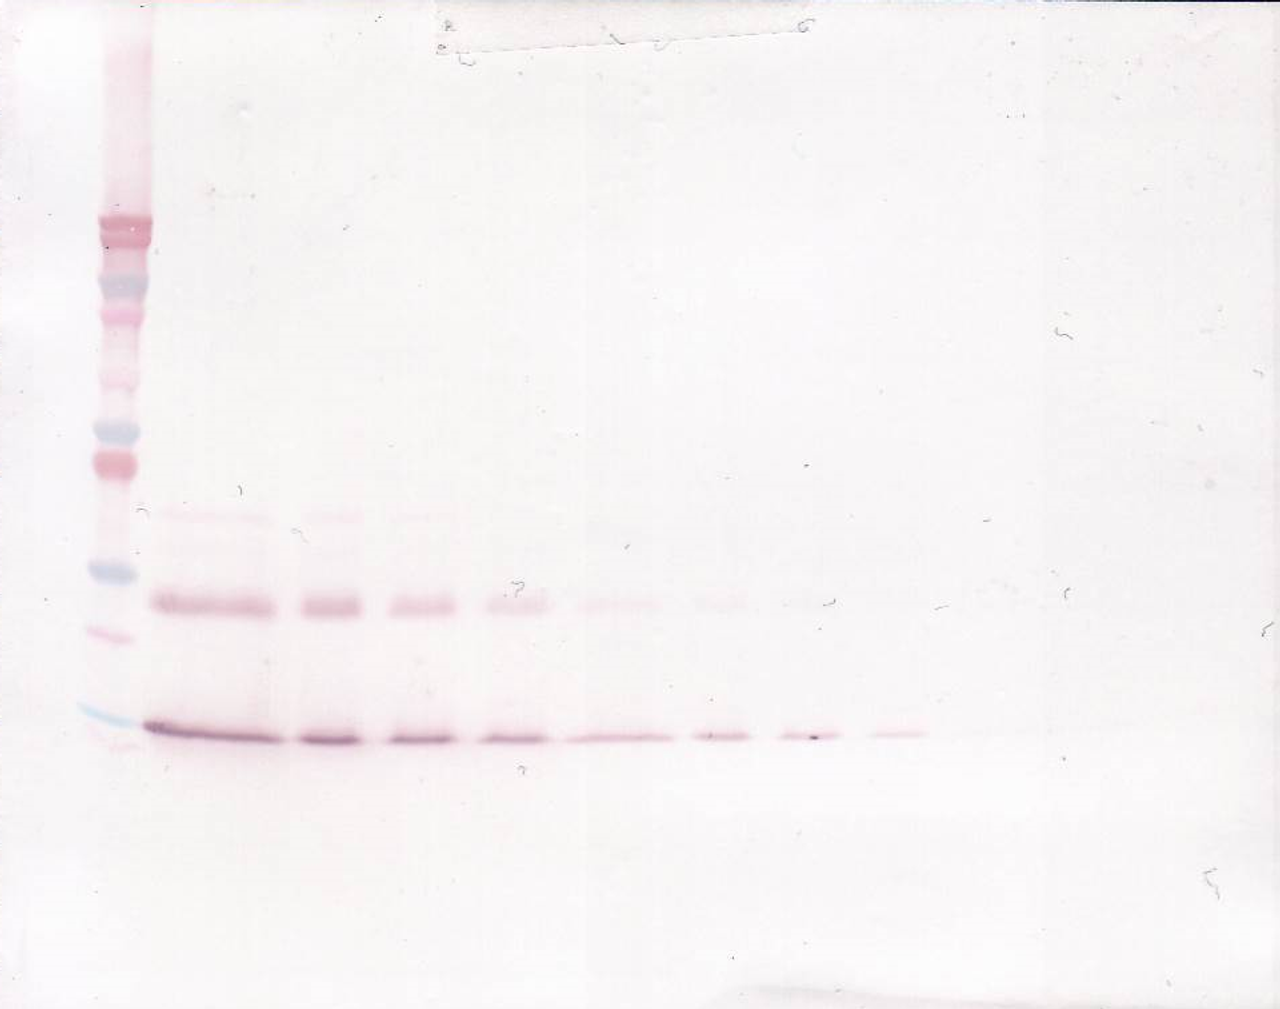 To detect Murine IL-9 by Western Blot analysis this antibody can be used at a concentration of 0.1 - 0.2 ug/ml. When used in conjunction with compatible secondary reagents, the detection limit for recombinant Murine IL-9 is 1.5 - 3.0 ng/lane, under either reducing or non-reducing conditions.